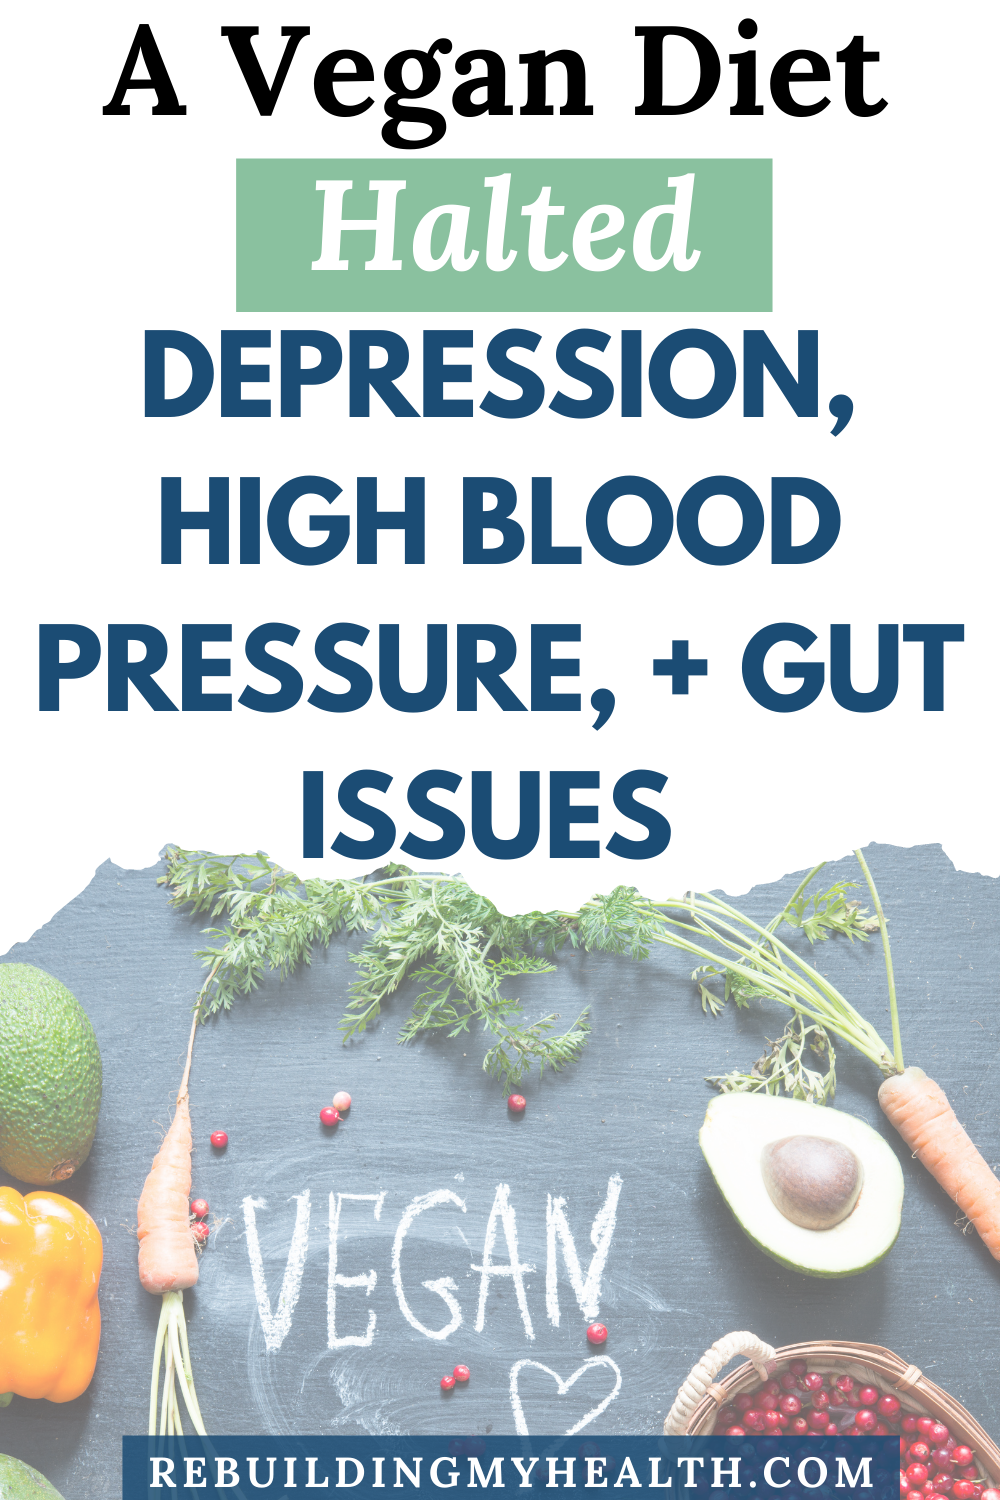 Learn how a 35-year-old father reduced depression, anxiety, fatigue, diarrhea, constipation and high blood pressure with a vegan diet.